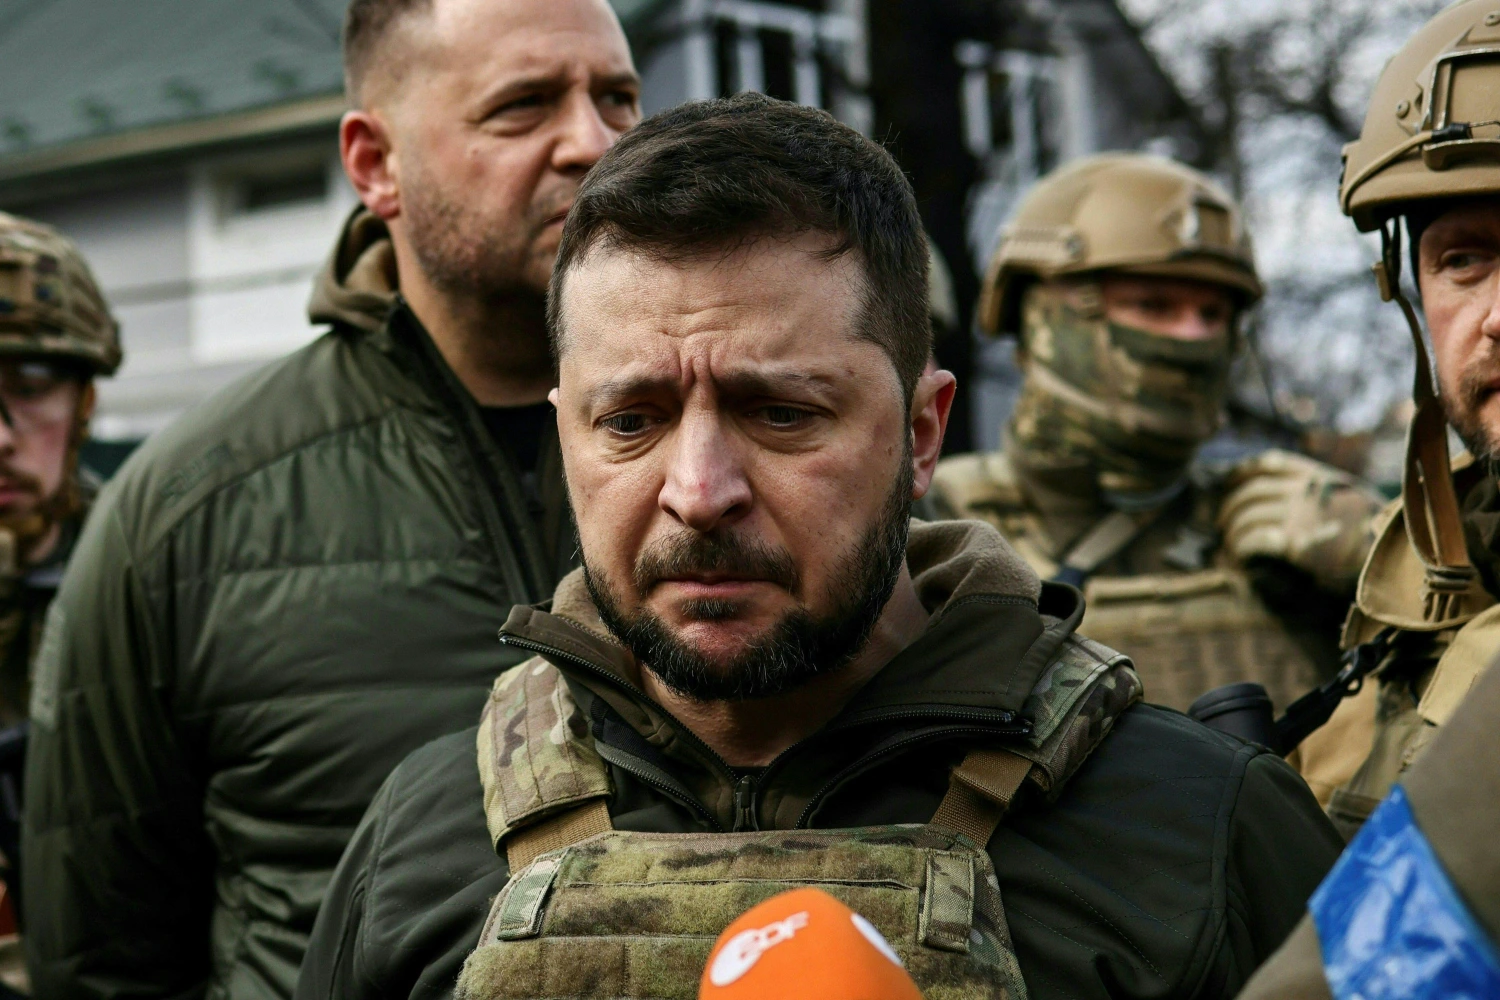 Zelenskyy Urges Allies to Provide Weapons for Ukraine's Continued Defense Against Russia